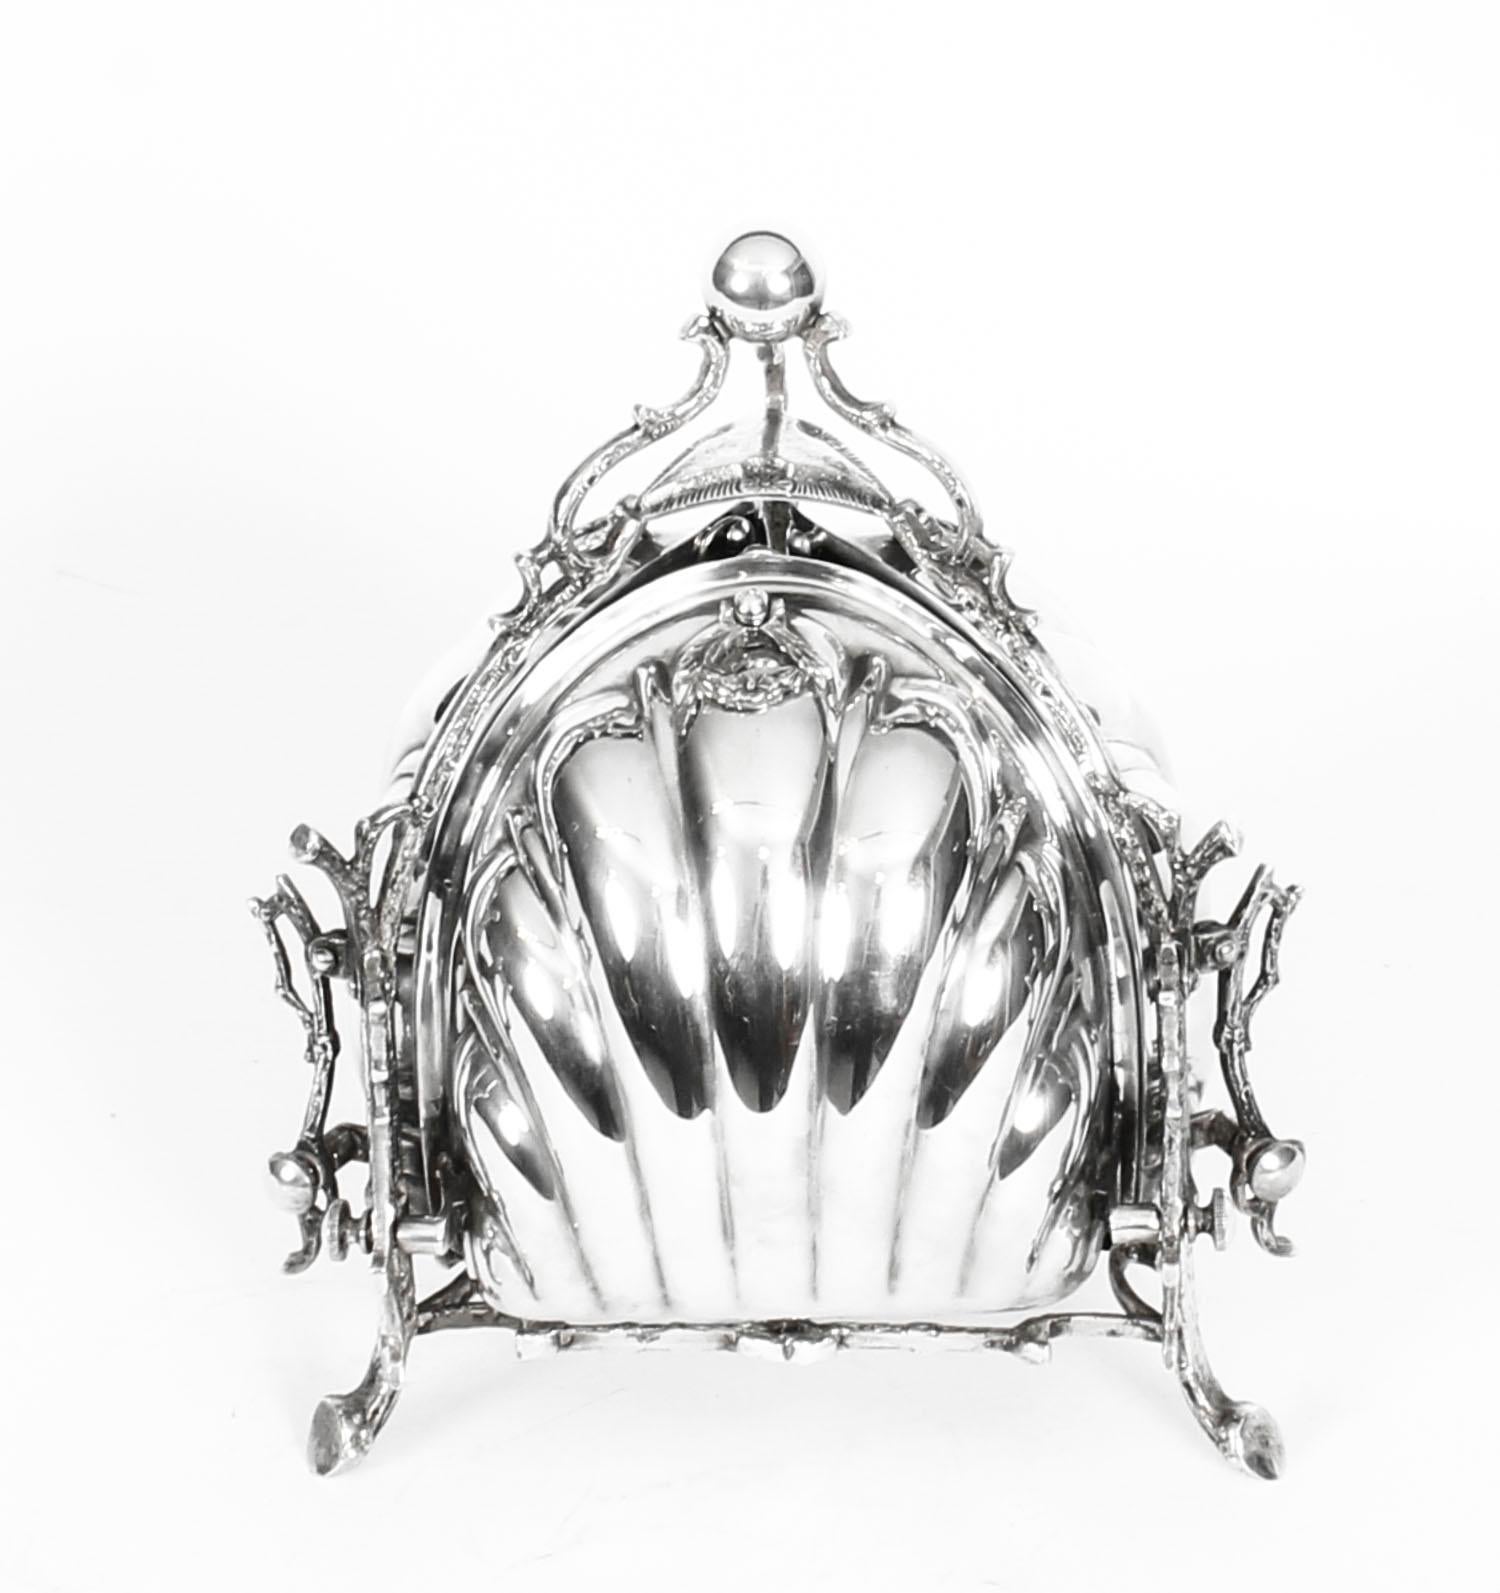 This is a beautiful antique Victorian triple clam shell shaped silver plated biscuit box stamped WA for W. Allan of Sheffield England, circa 1870 in date.

The scalloped biscuit box features a rounded triangular pyramid scalloped shell shaped body